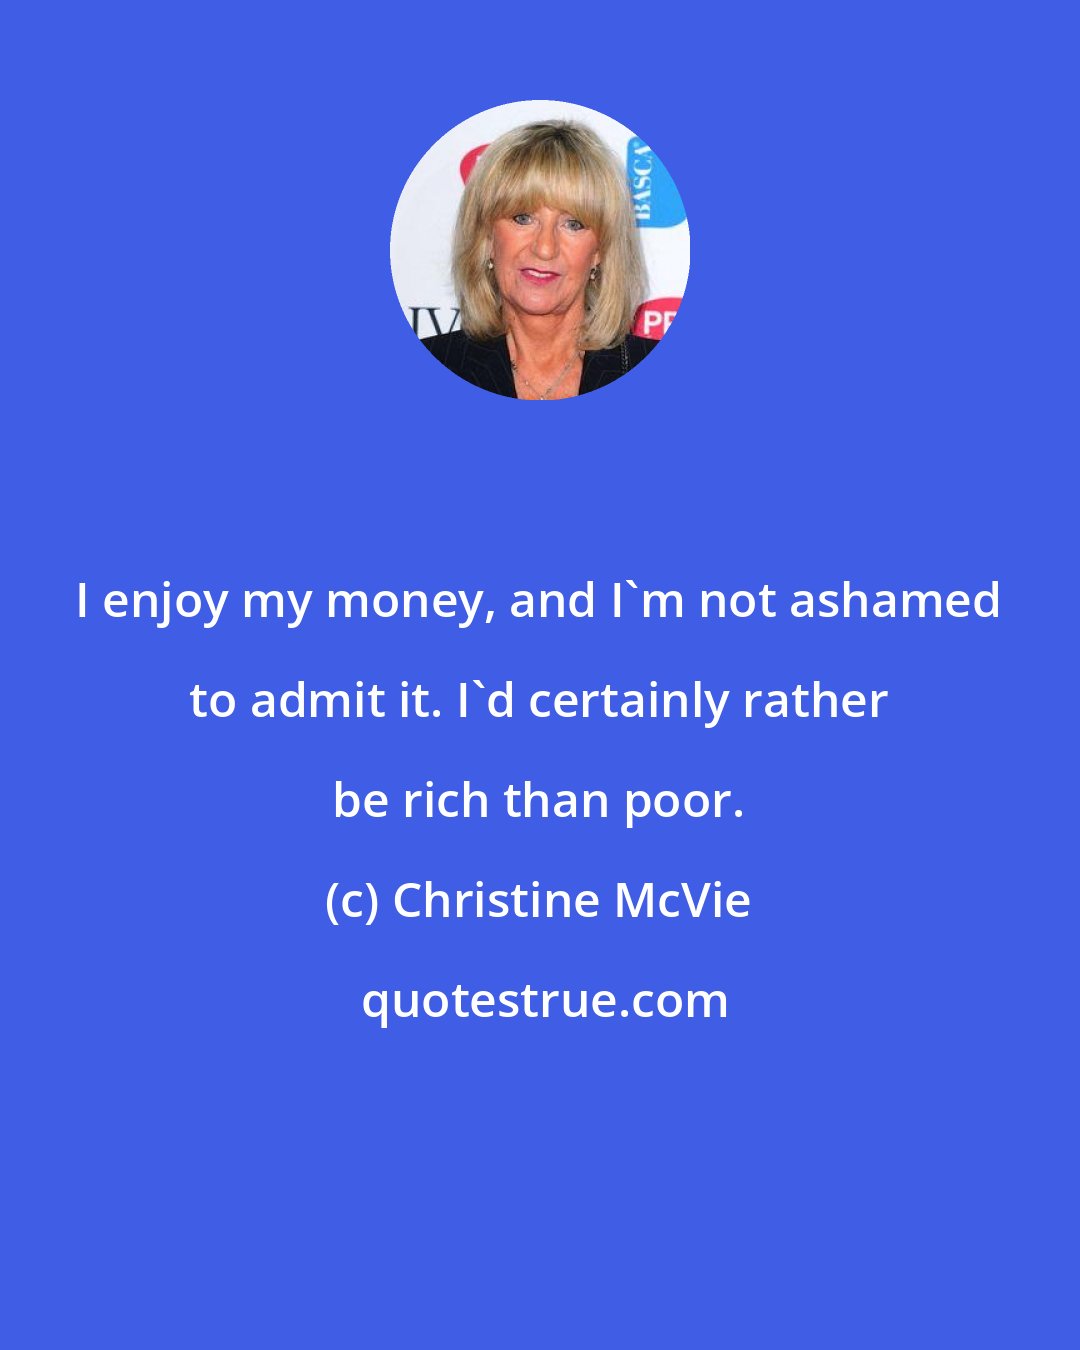 Christine McVie: I enjoy my money, and I'm not ashamed to admit it. I'd certainly rather be rich than poor.